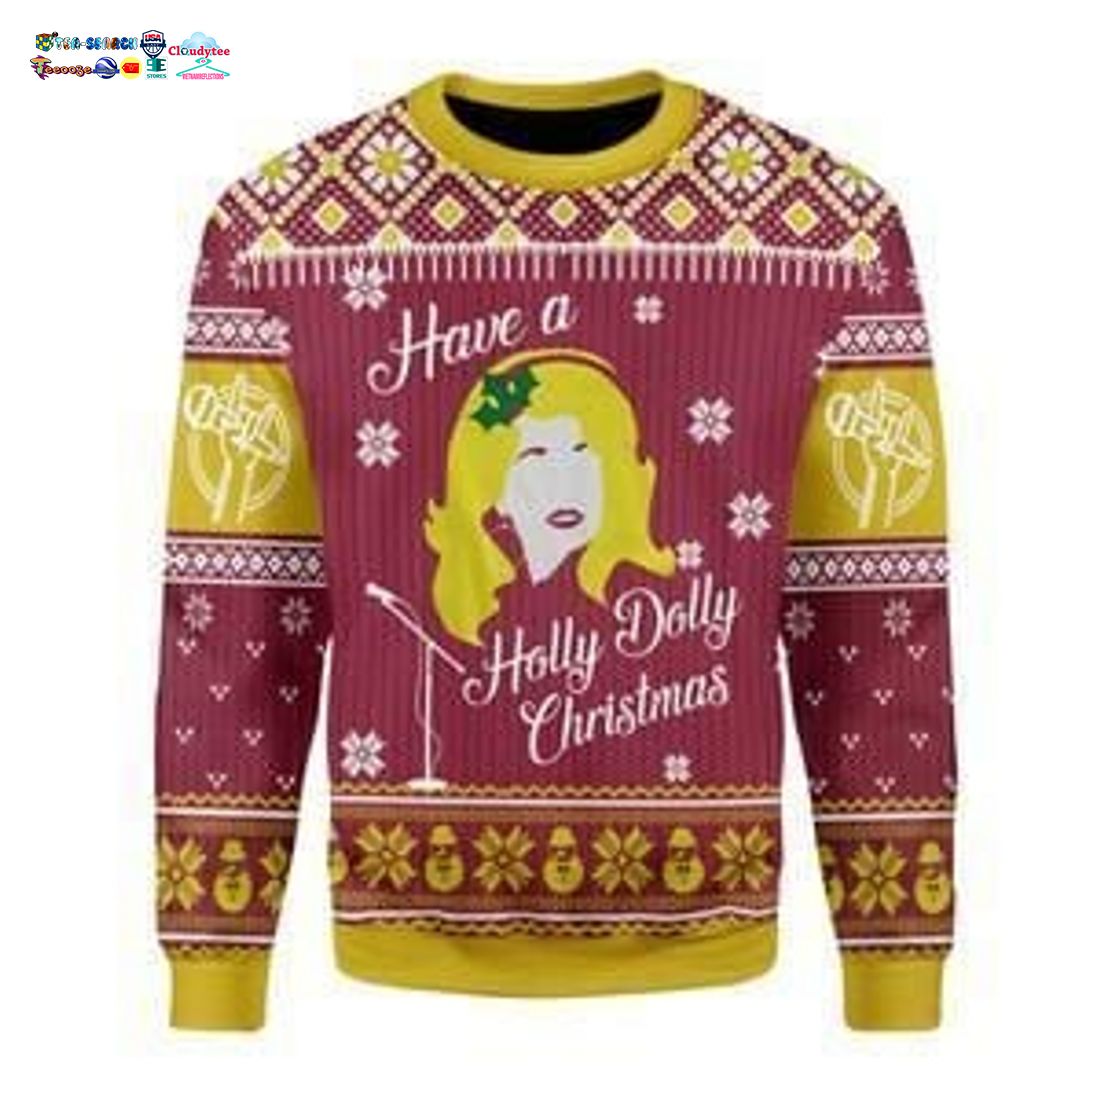 Have A Holly Dolly Christmas Ugly Christmas Sweater - Unique and sober